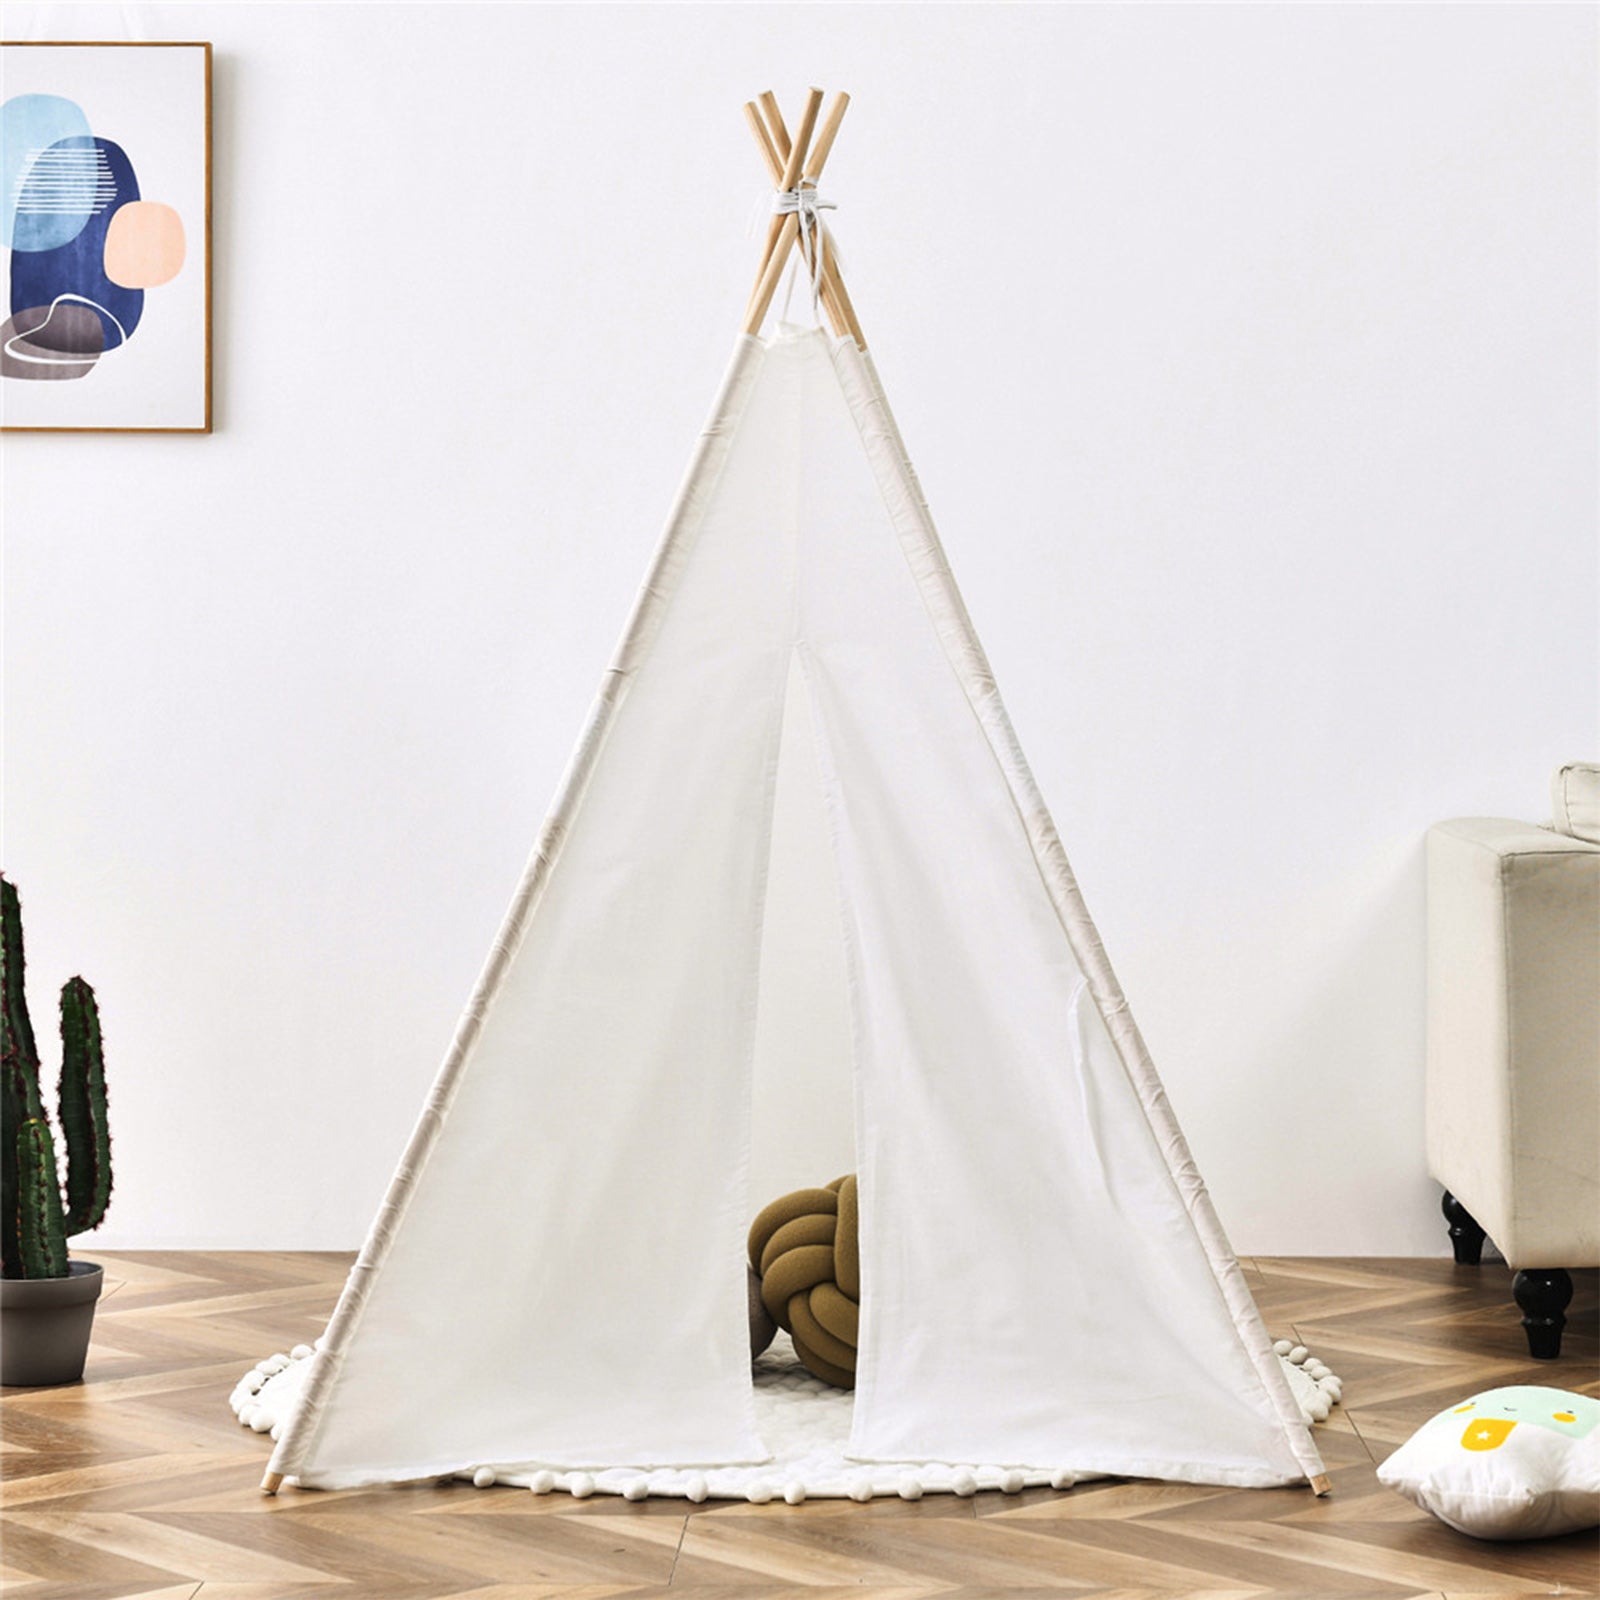 Outdoor Cotton Canvas Teepee Pop-Up Kids' Play Tent